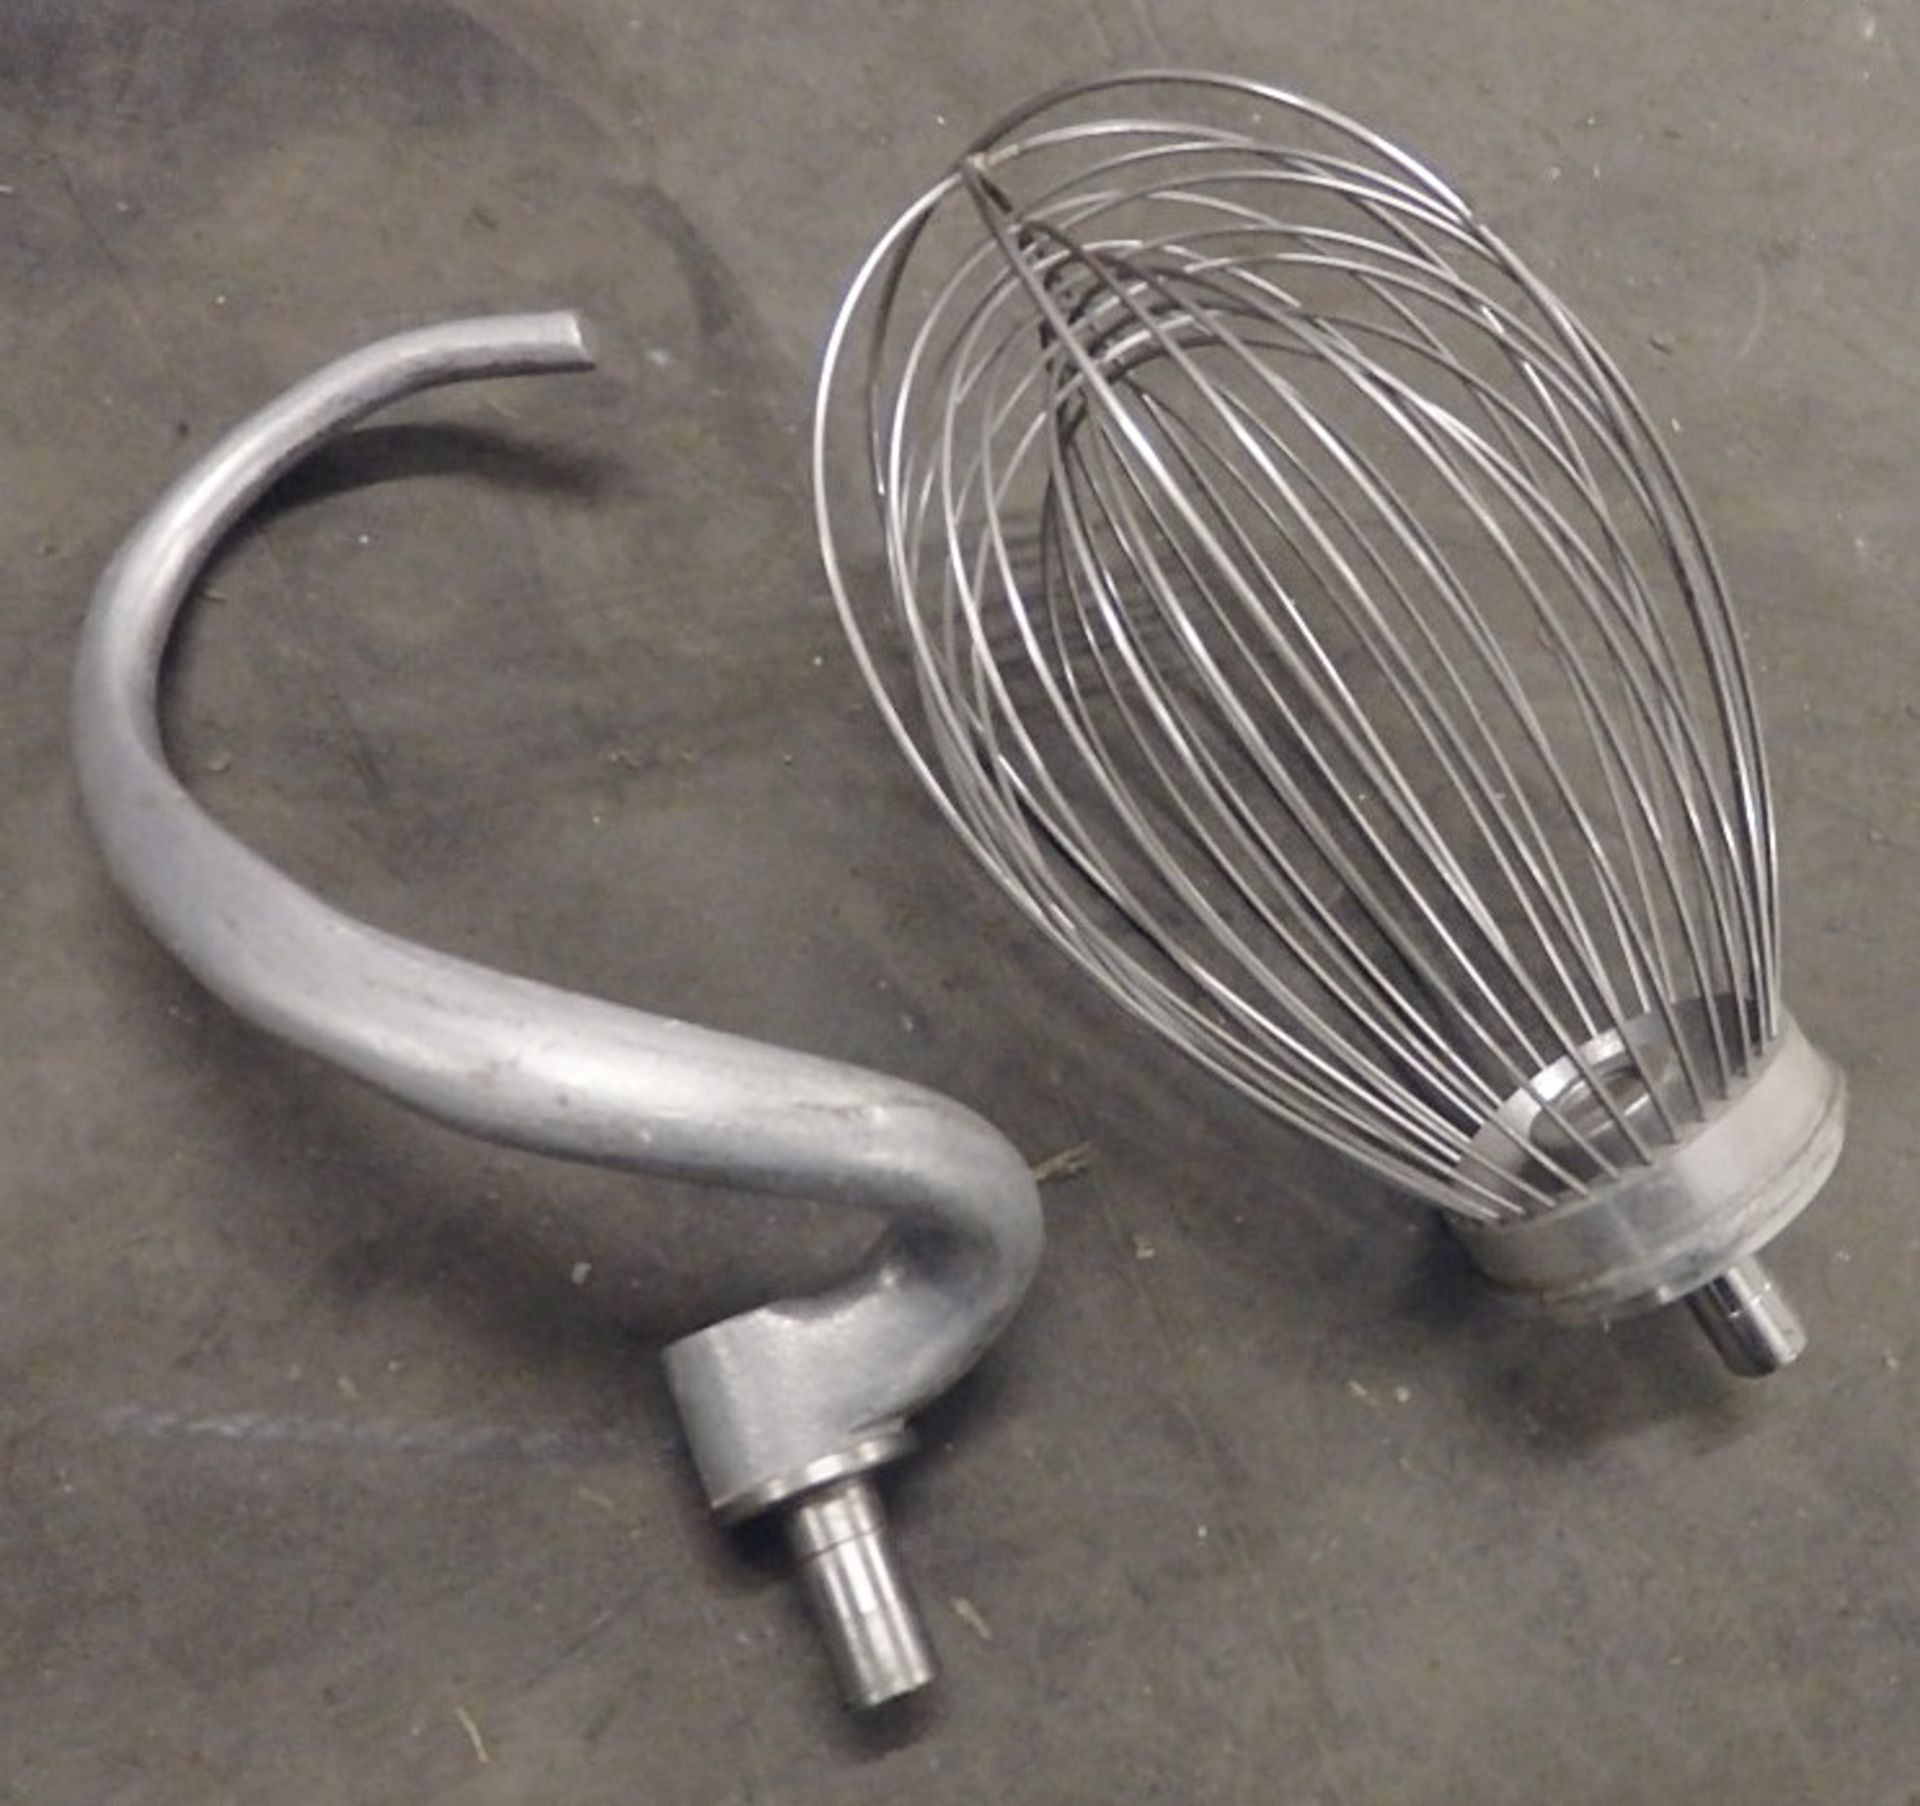 1 x Sammic Planetary Mixer With Whisk, Hook, Paddle - Presented in Good Condition - Dimensions: - Image 5 of 7